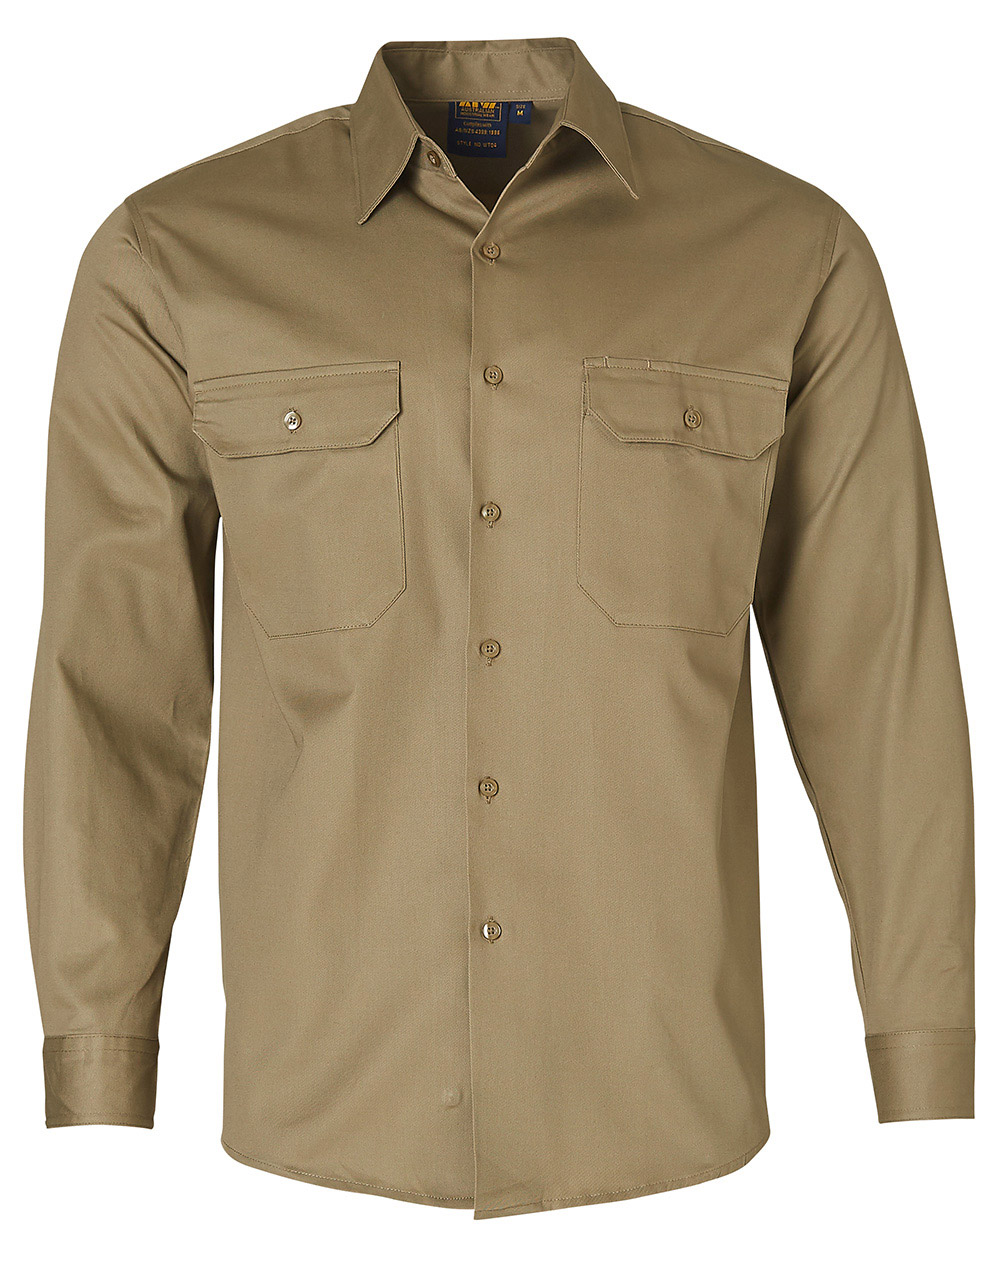 WT04 COTTON DRILL WORK SHIRT - Promote Your Brand